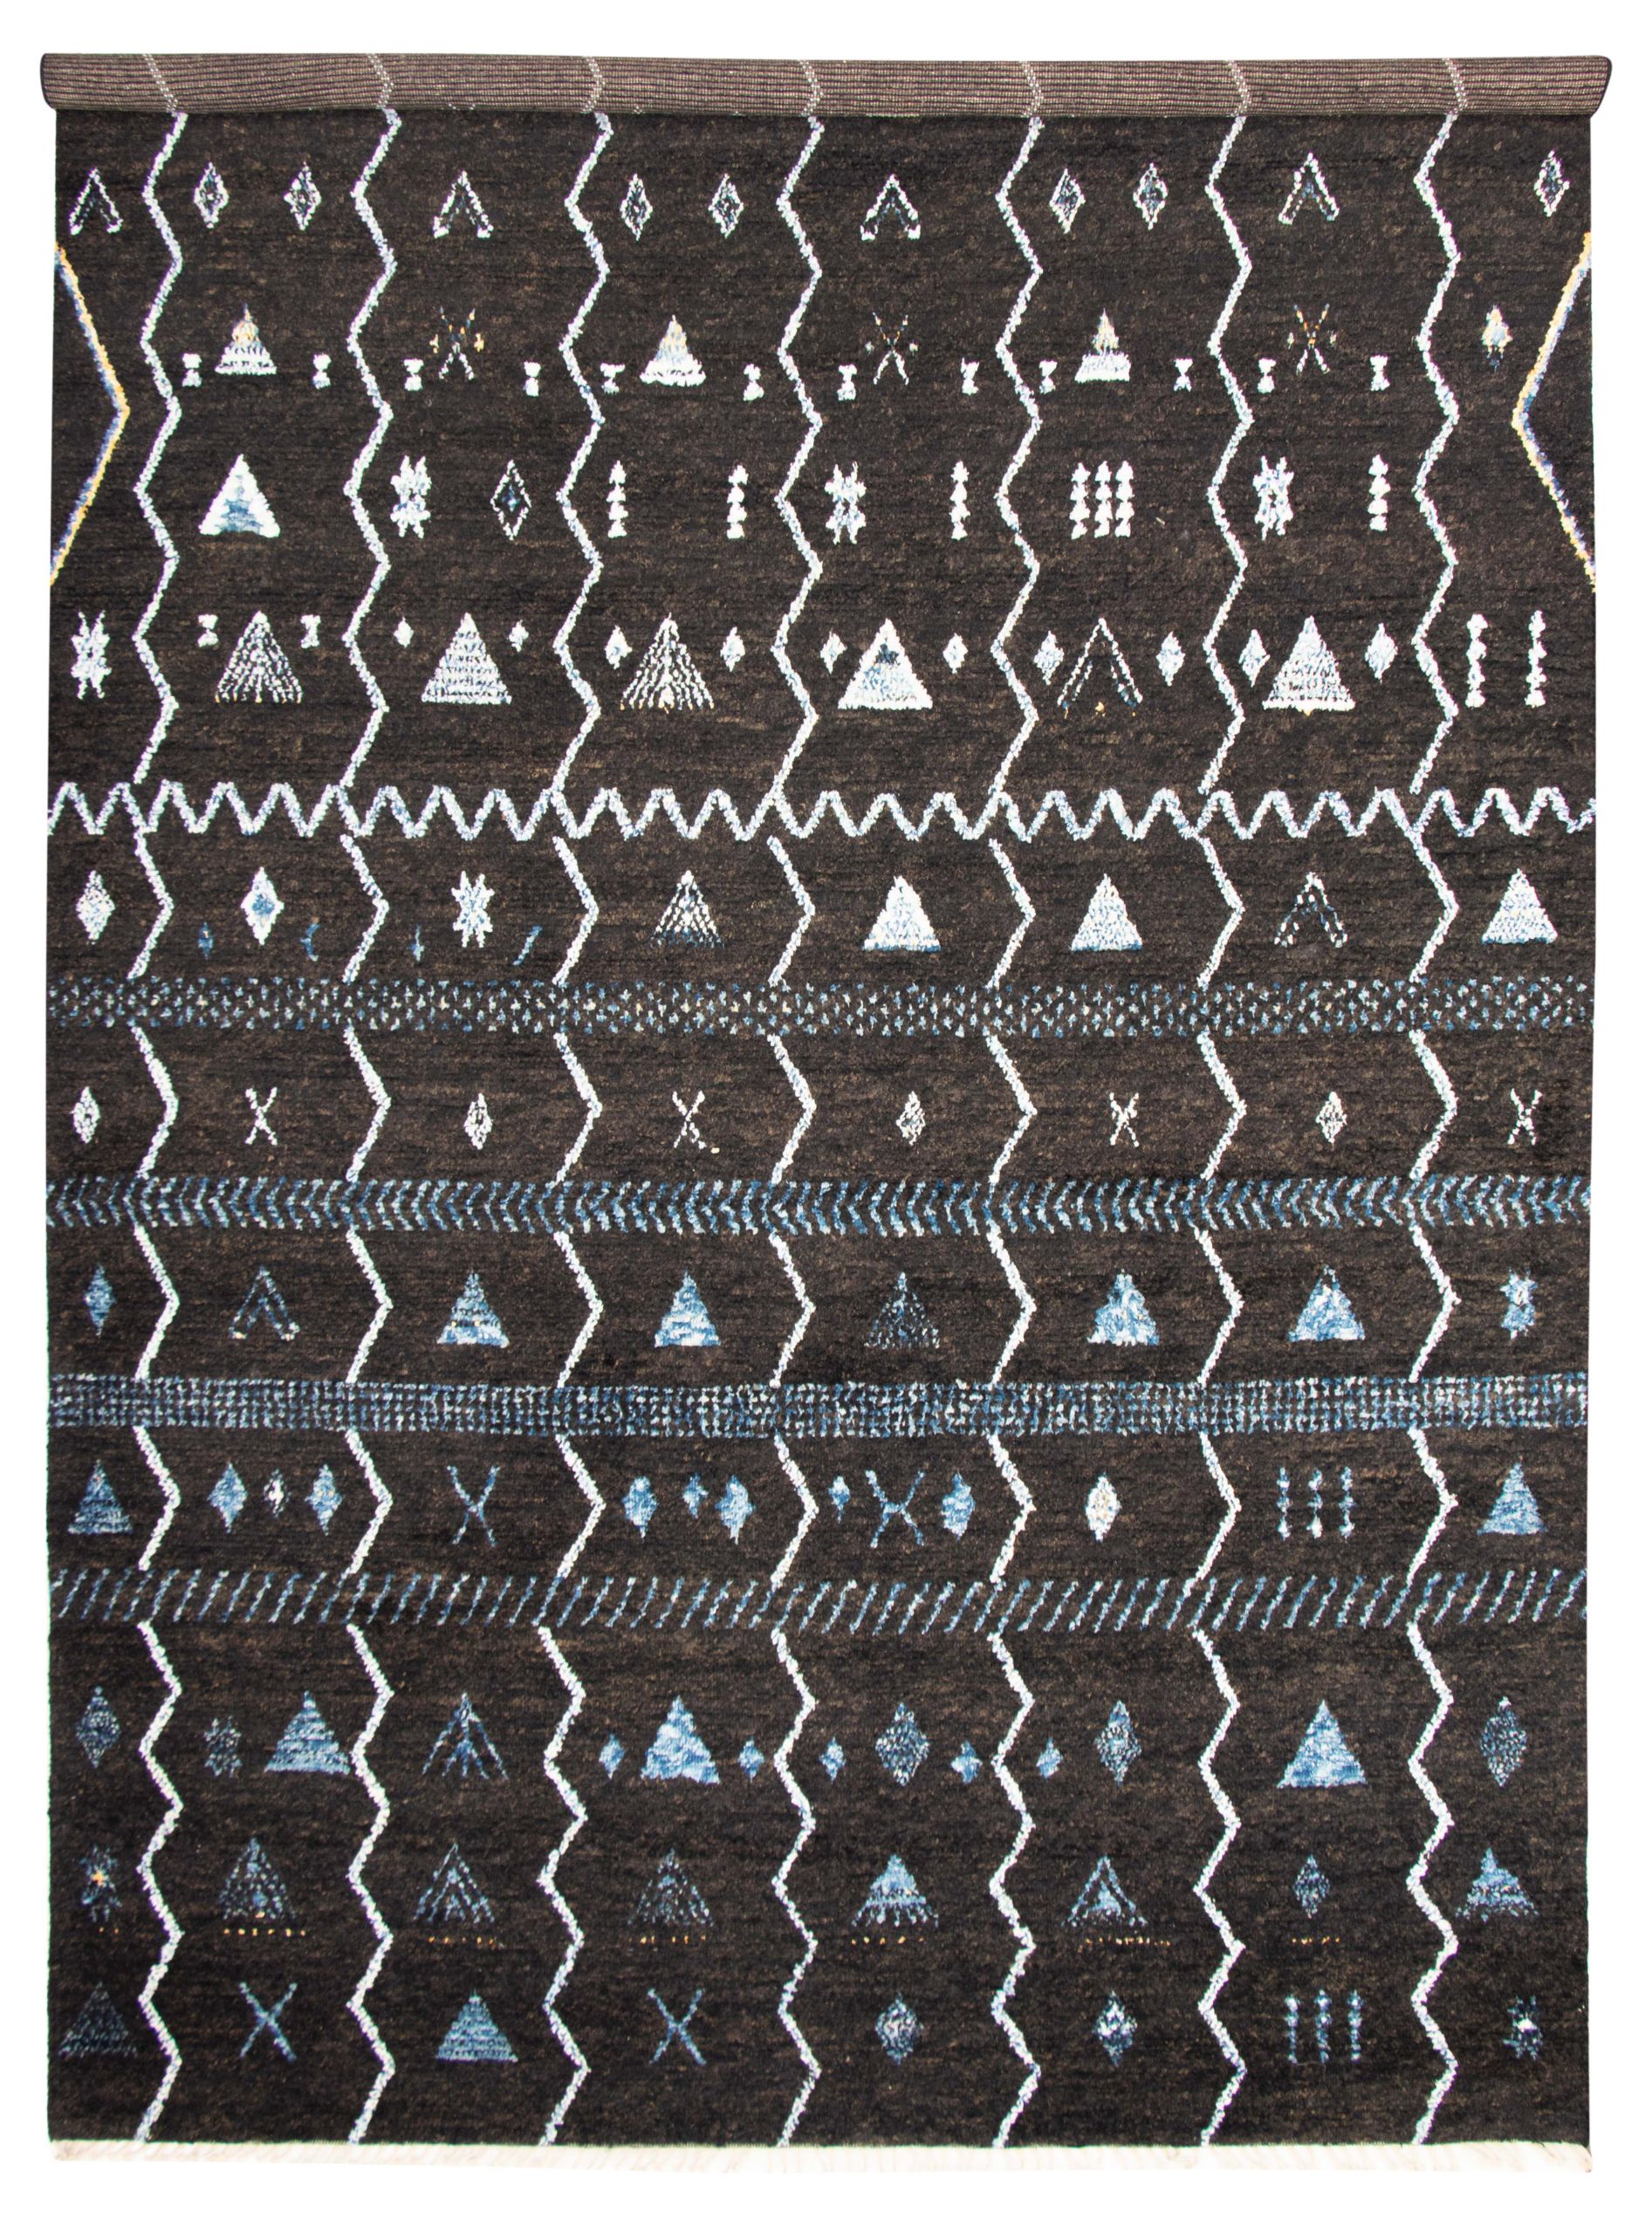 Hand-knotted Marrakech Black Wool Rug 9'11" x 14'7" Size: 9'11" x 14'7"  